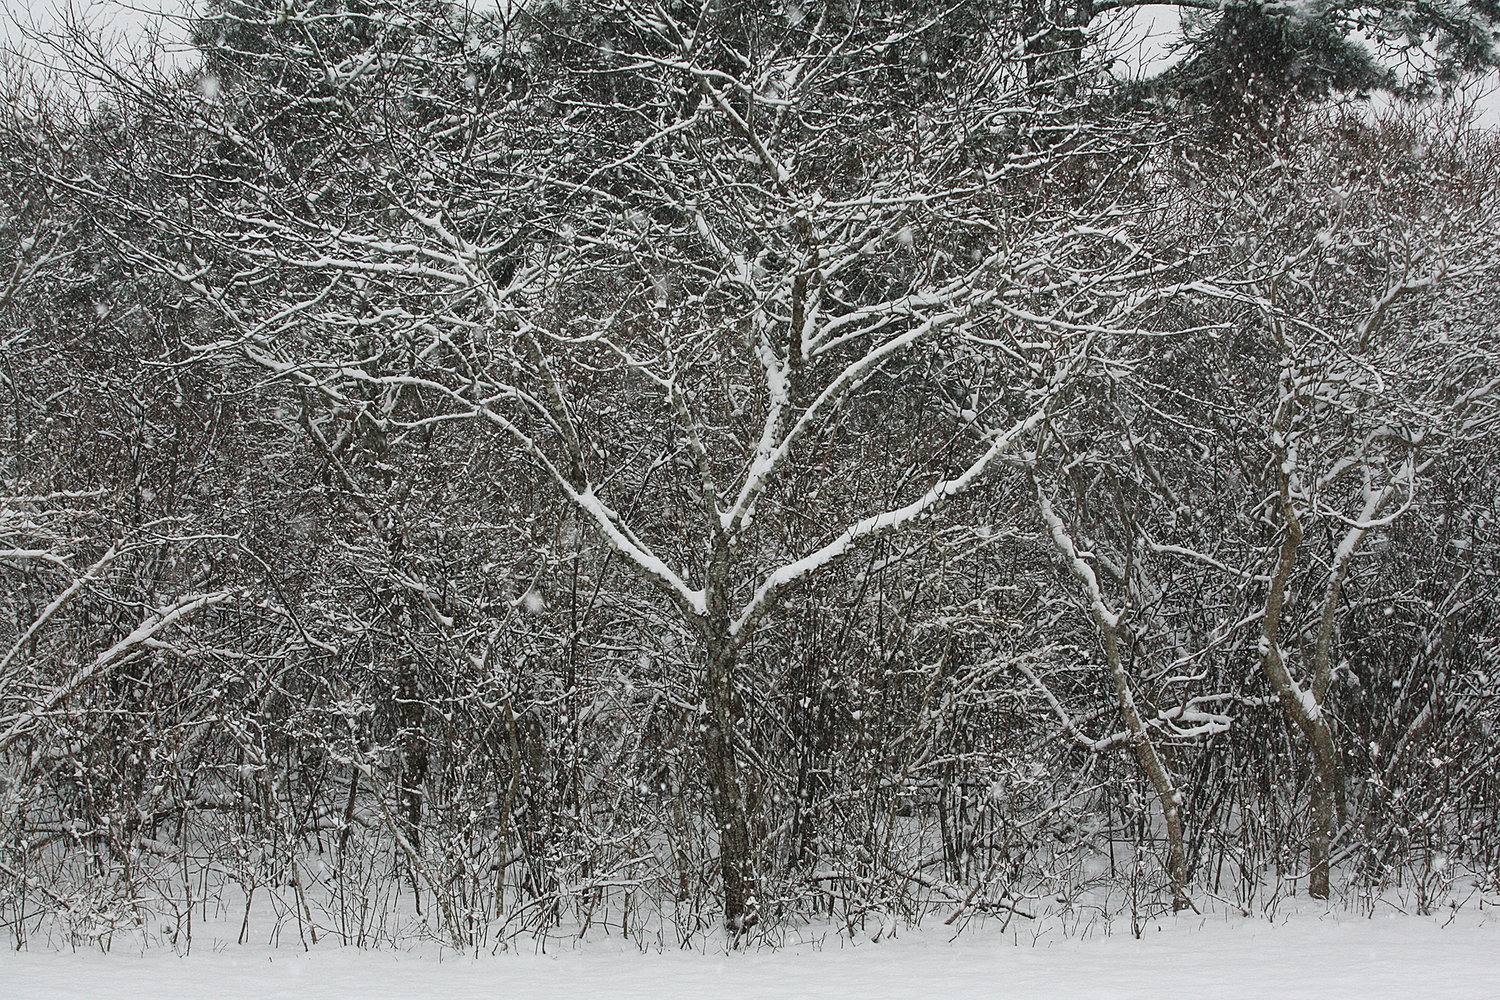 Thursday's snow clings to branches along Miacomet Road.